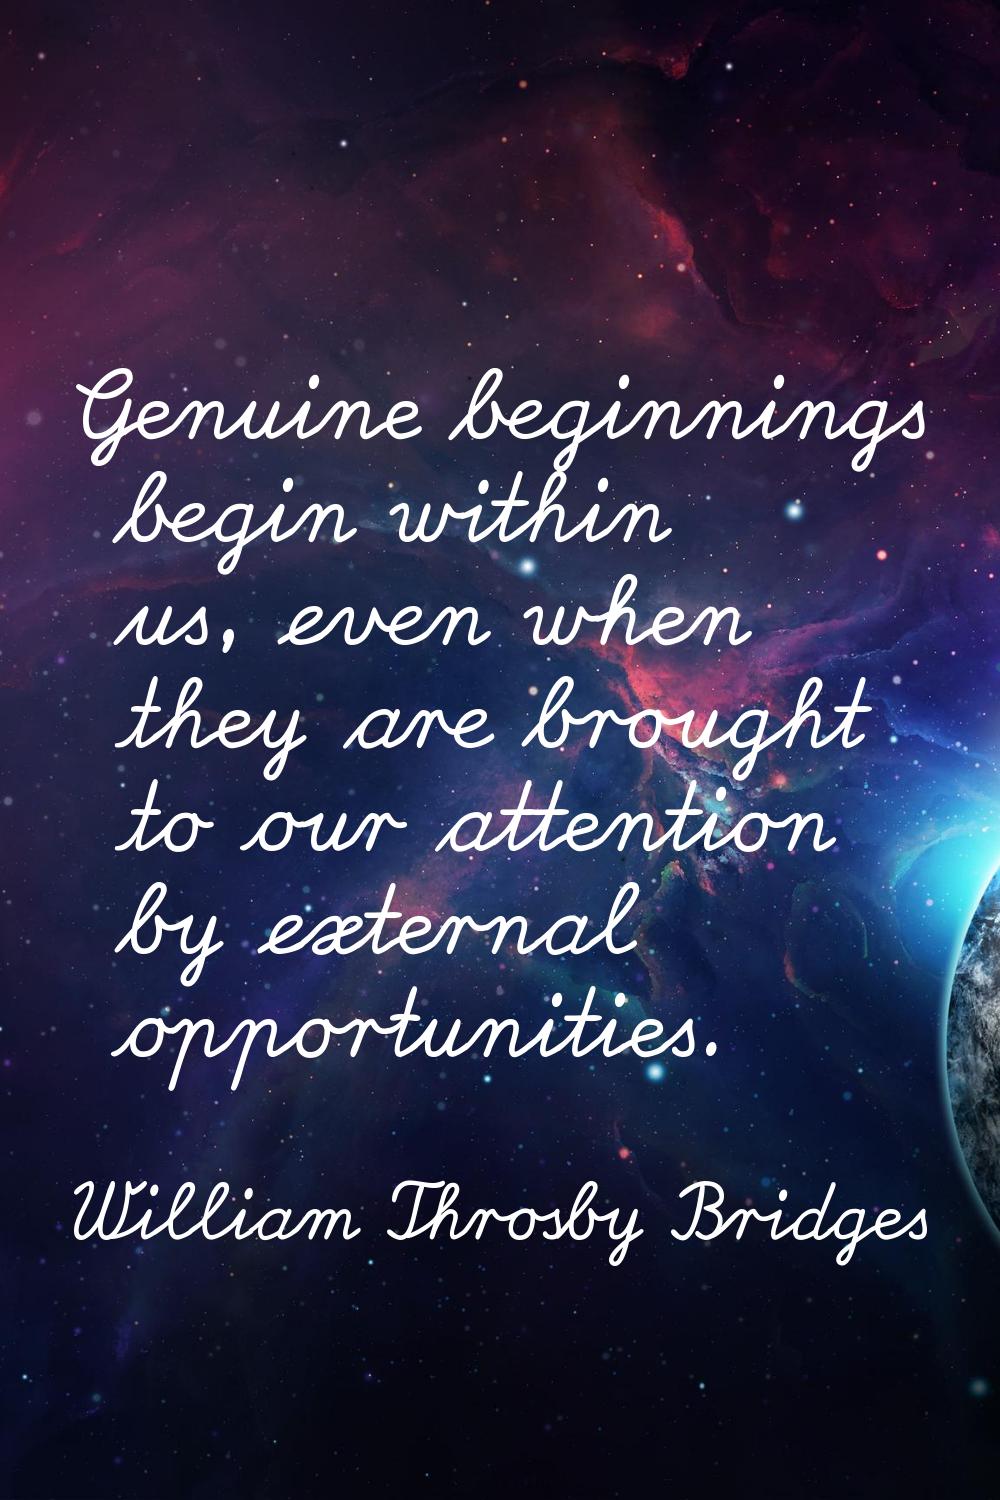 Genuine beginnings begin within us, even when they are brought to our attention by external opportu